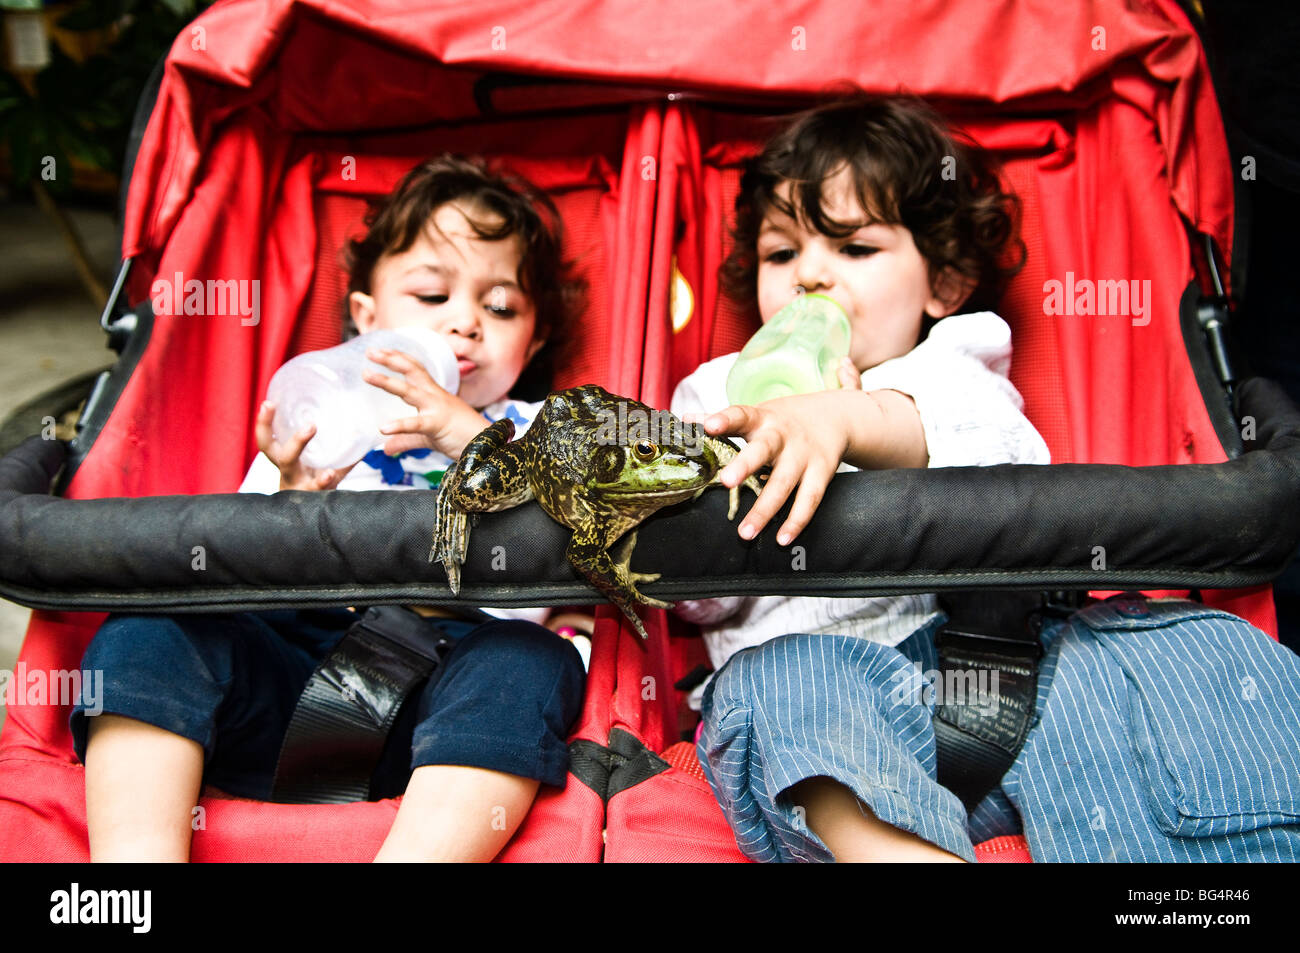 Curious twins play with a big frog that visited them on their stroller. Stock Photo